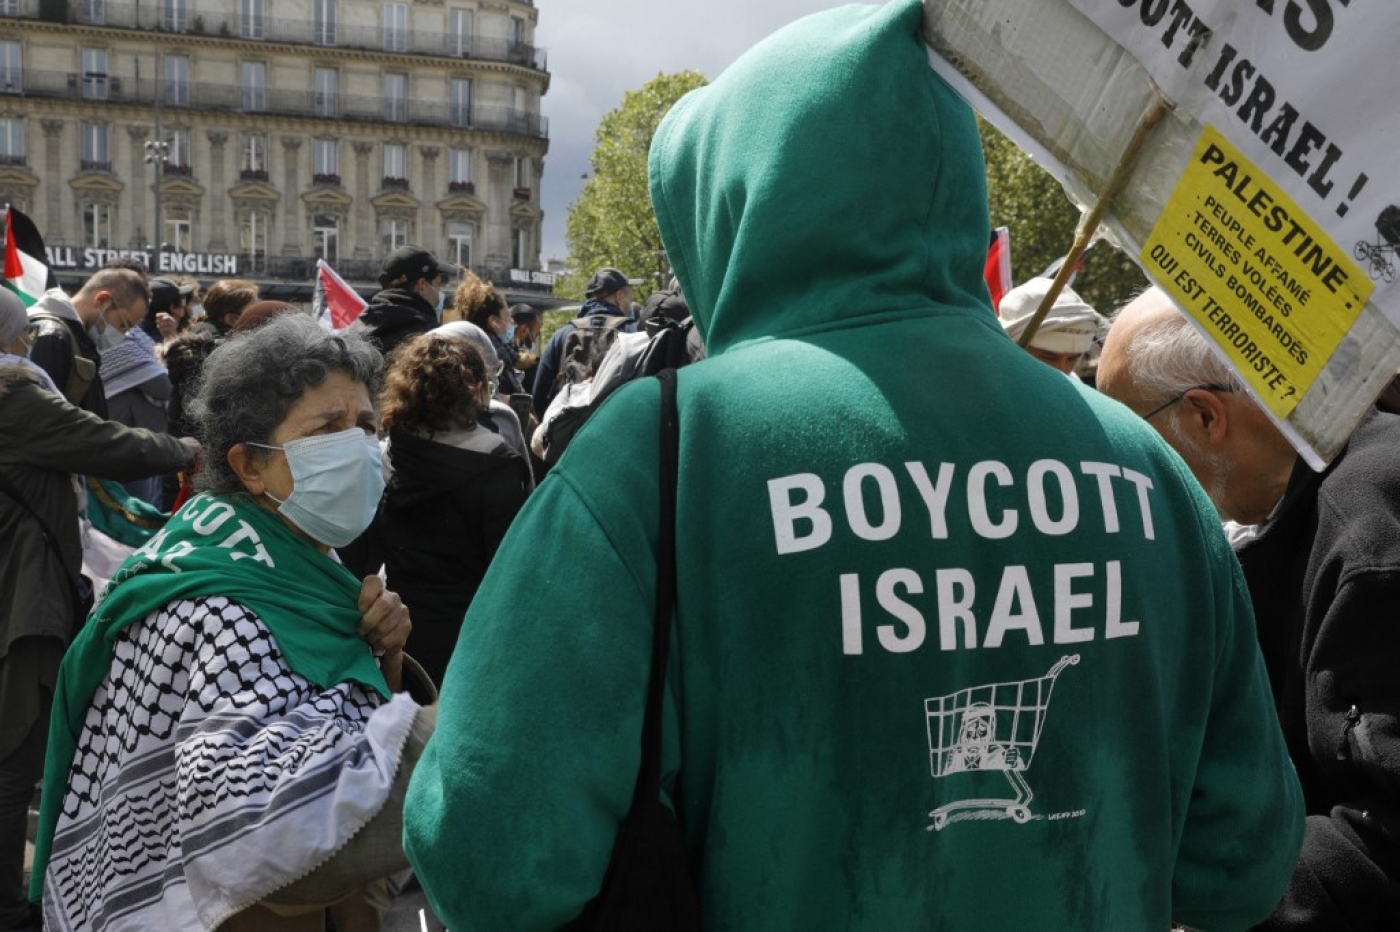 A man wears a hoodie reading "Boycott Israel" at a demonstration in solidarity with the Palestinian people in Paris on 22 May 2021